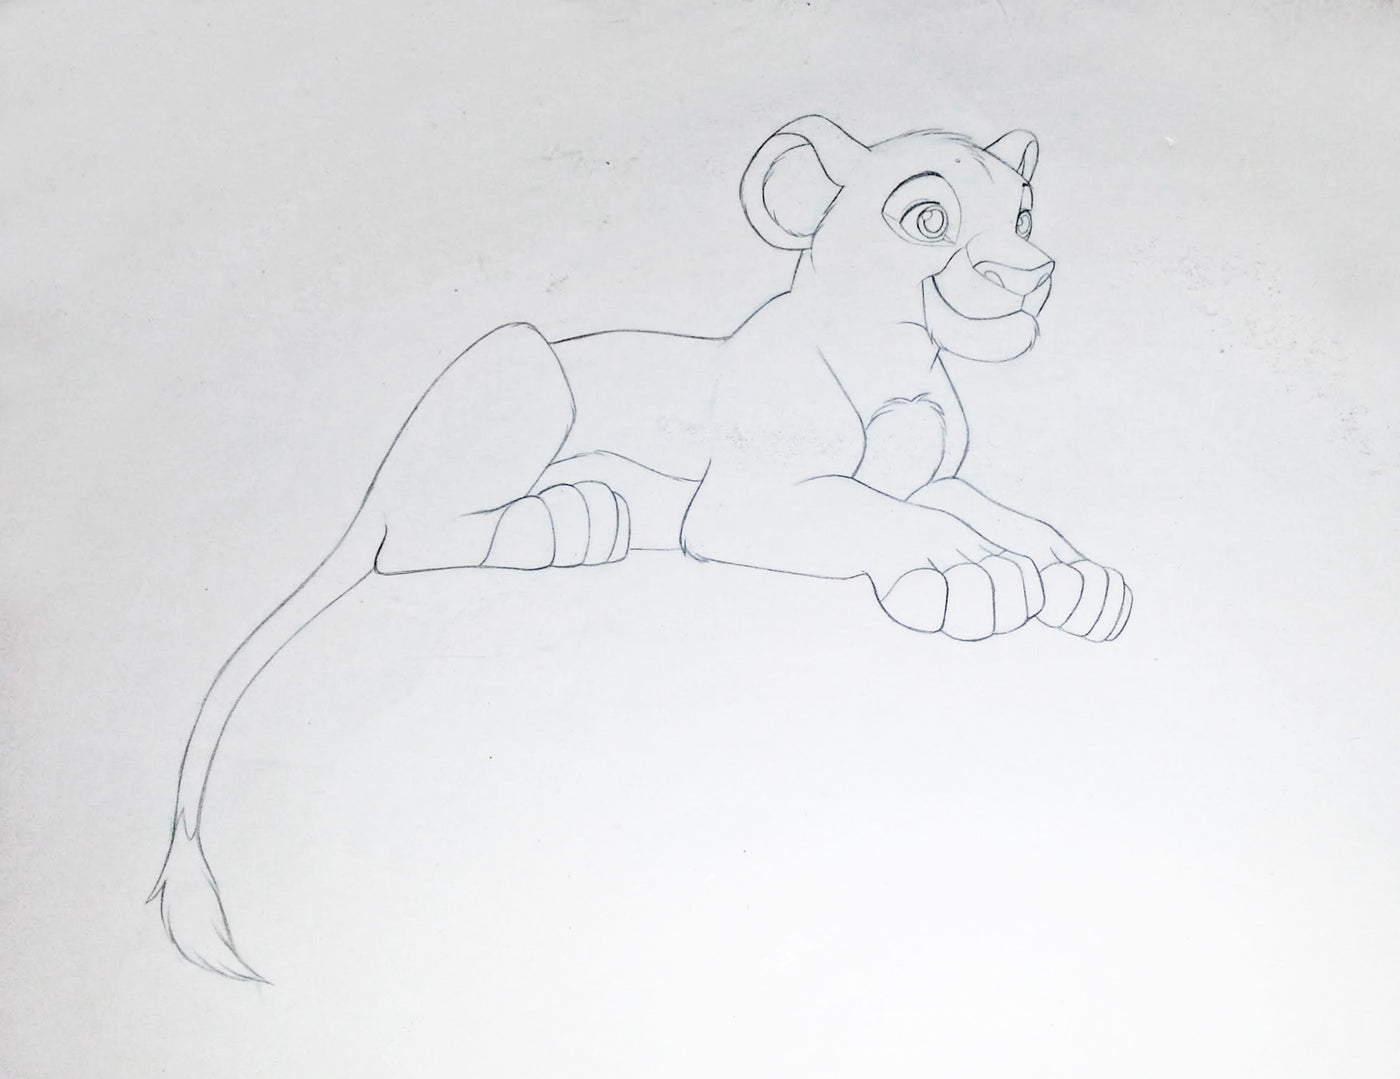 Original Walt Disney Publicity Drawing from The Lion King